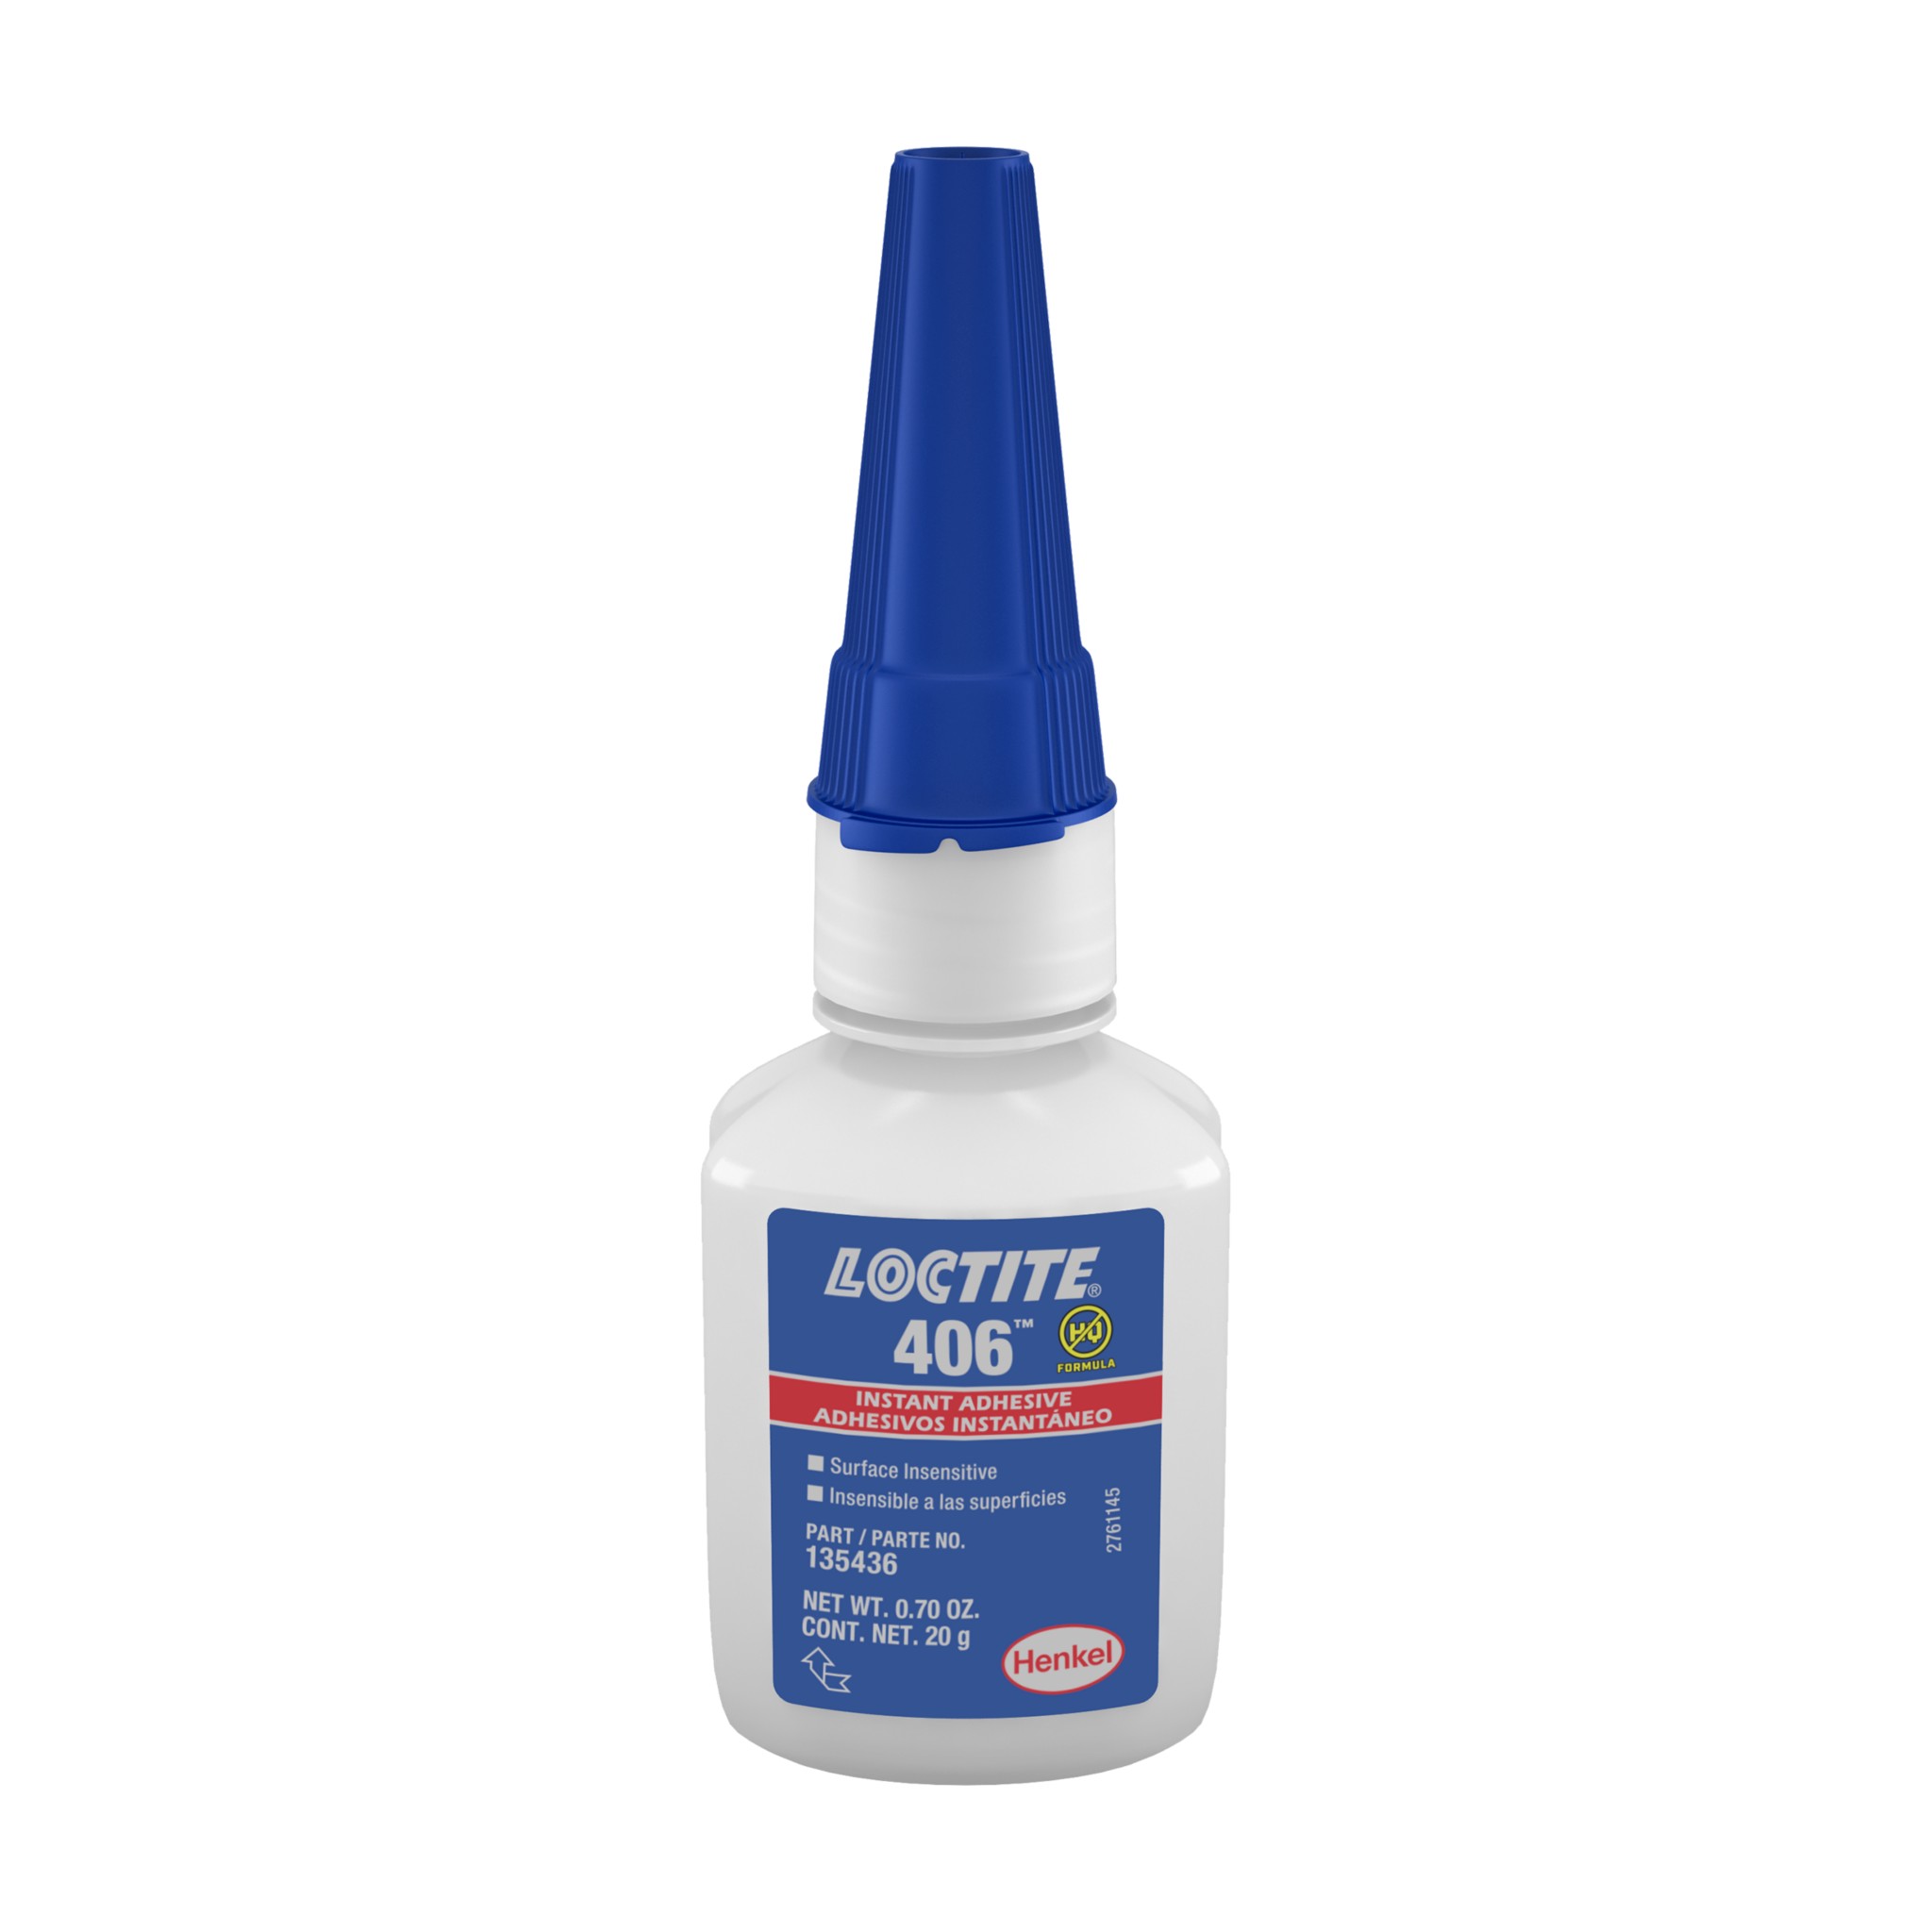 500g 20g Loctite 406 Super Glue Strong Adhesive Metal Plastic Wood Rubber  Quick Instant Drying Glue